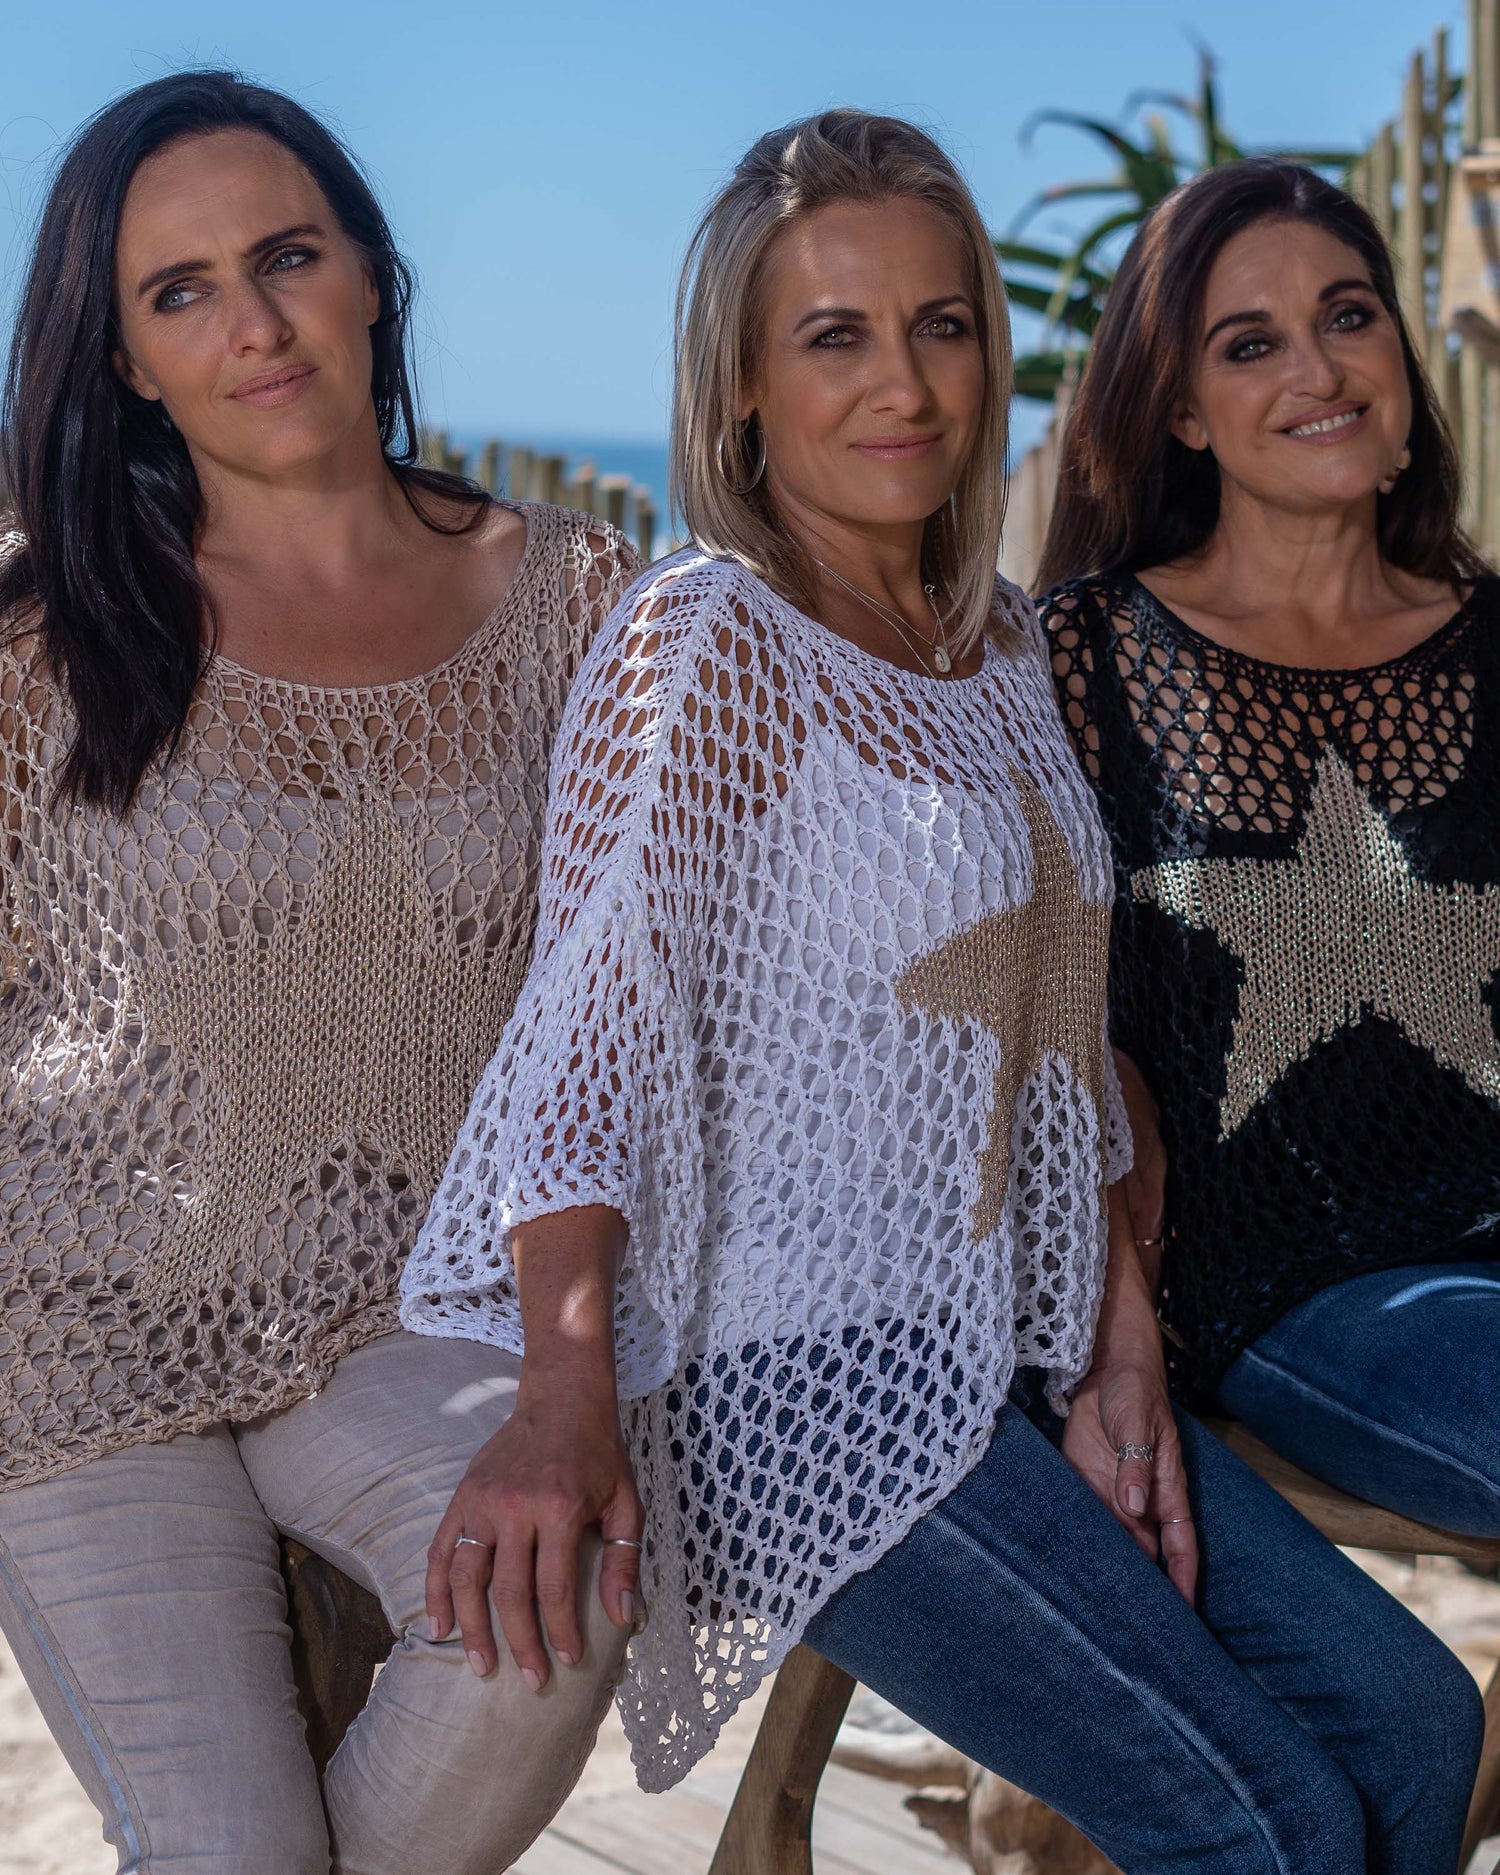 This uniquely designed loosely knitted knit boasts a luxurious feel and showcases a stunning gold star decal at the front center, adding a touch of celestial charm to your everyday look! Block cut offers a flattering overall look. Pair it with a neutral camisole and you're ready to take on the day - turning heads as you move along